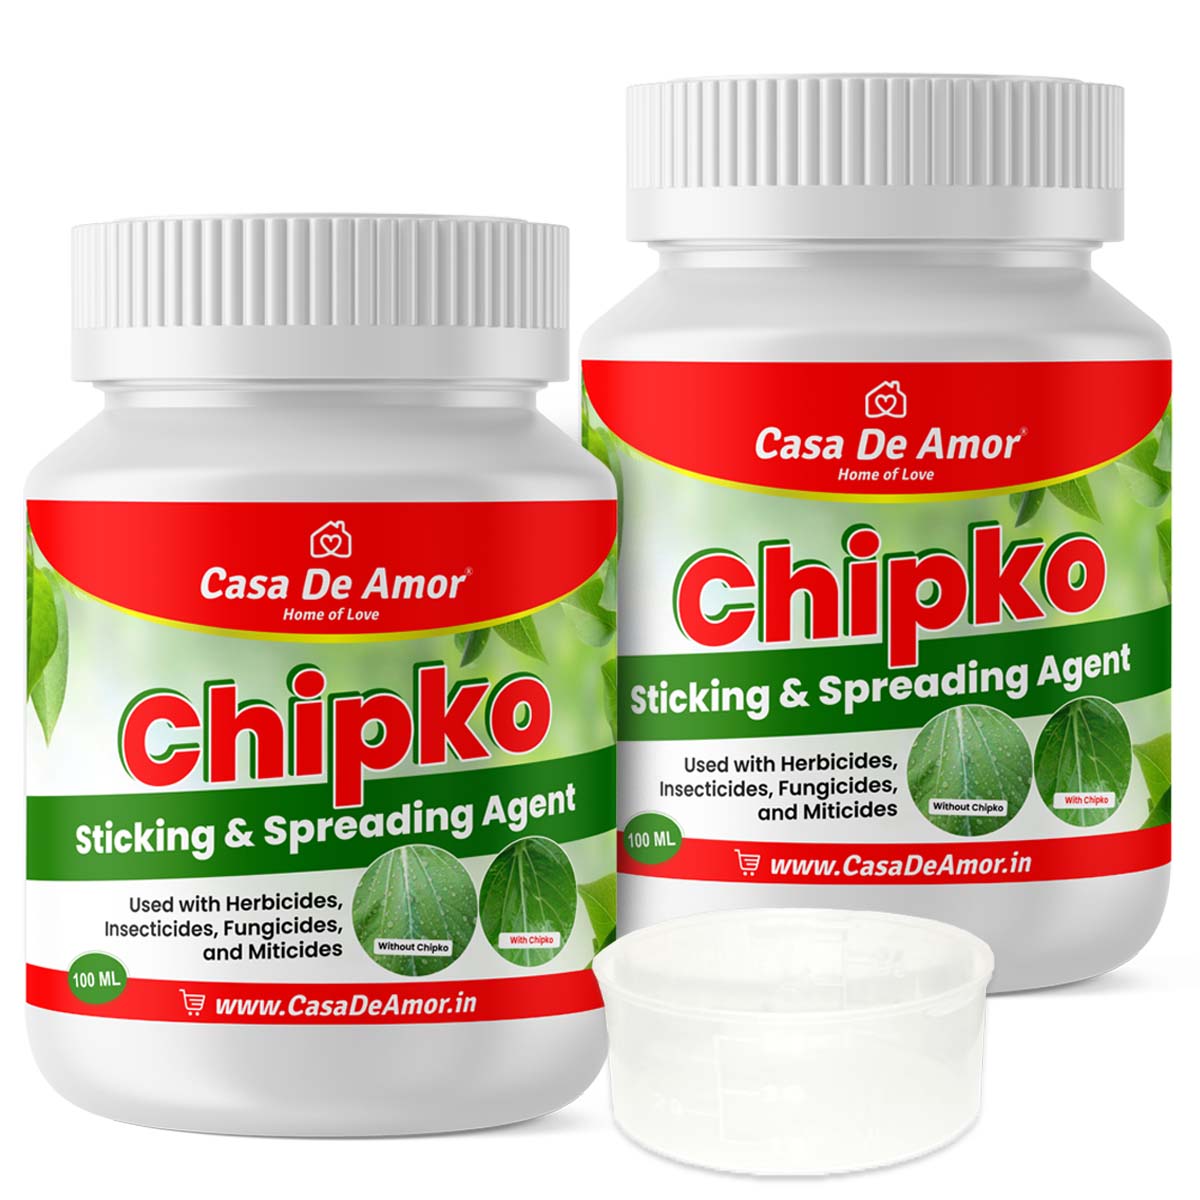 Casa De Amor Chipko Sticking & Spreading Agent (Used with Herbicides, Insecticides, Fungicides & Miticides)